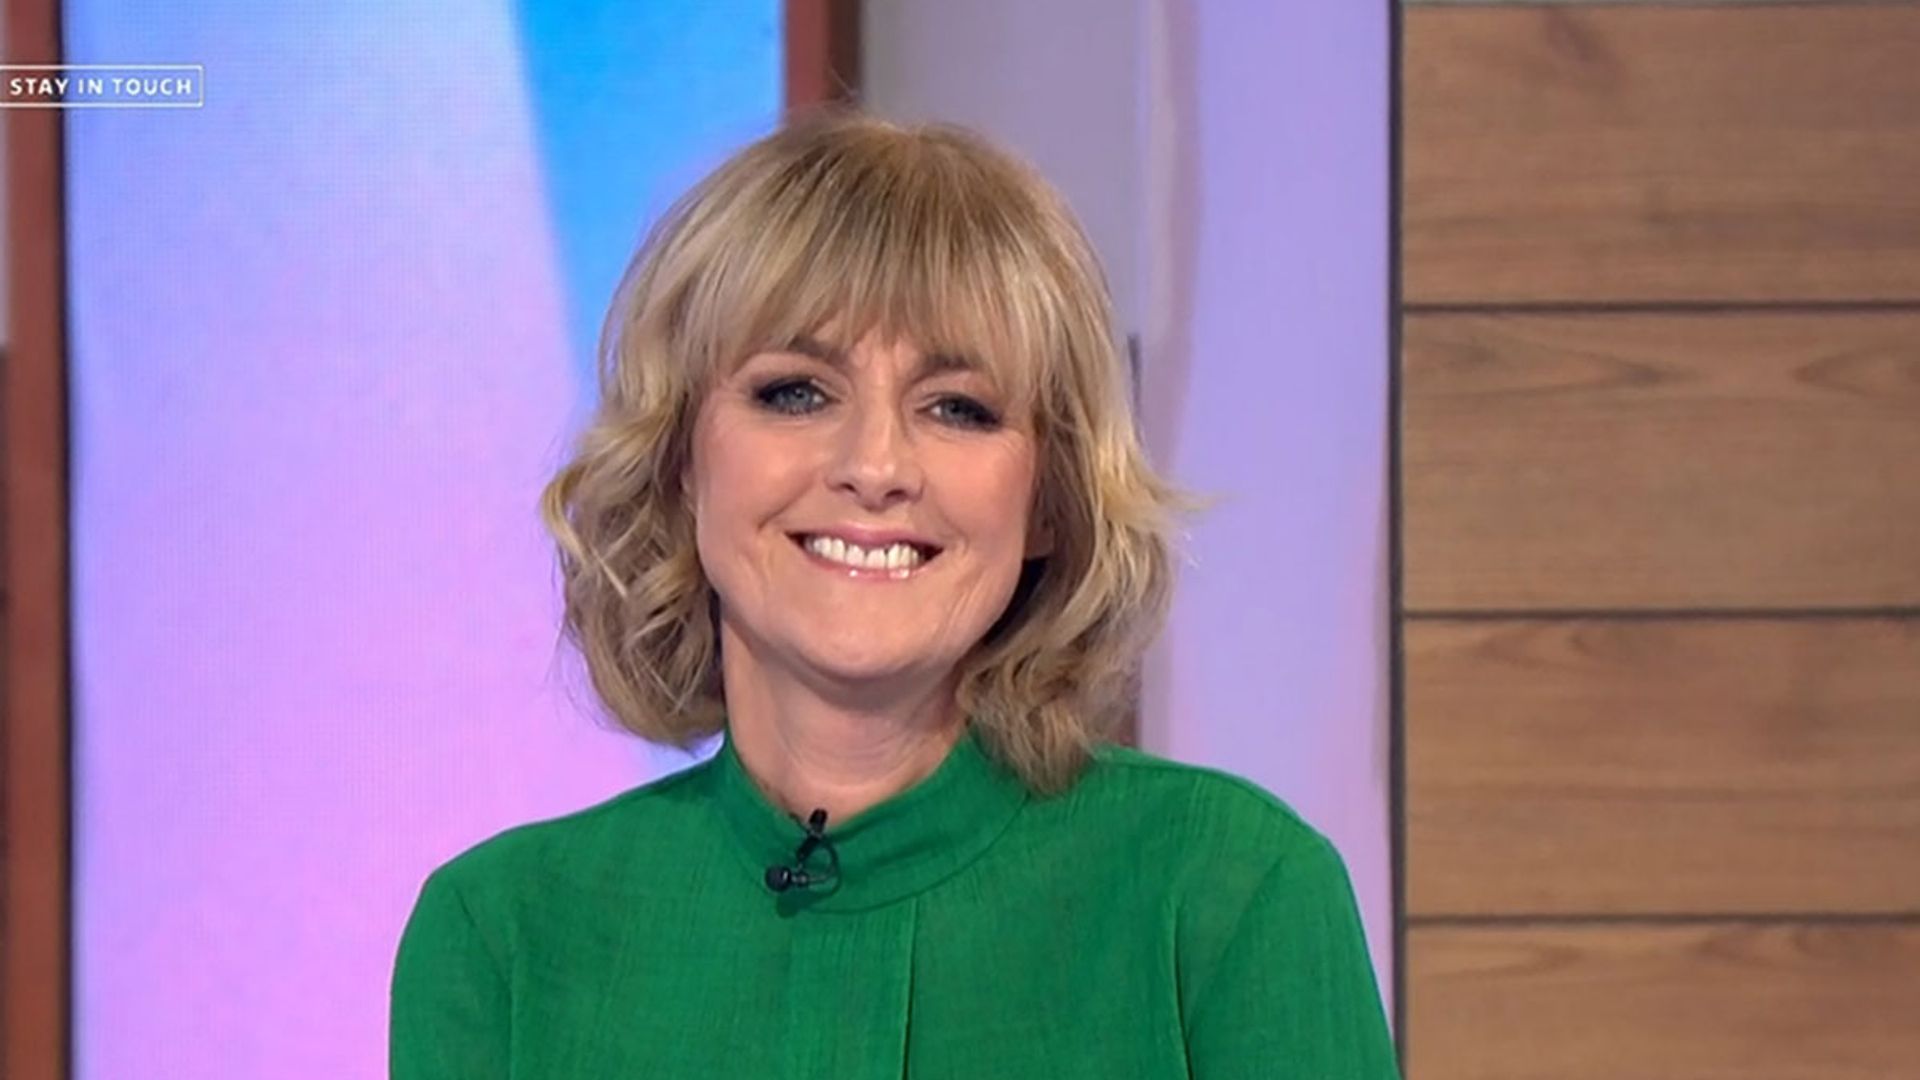 Jane Moore dons unexpected suit - and it's so striking